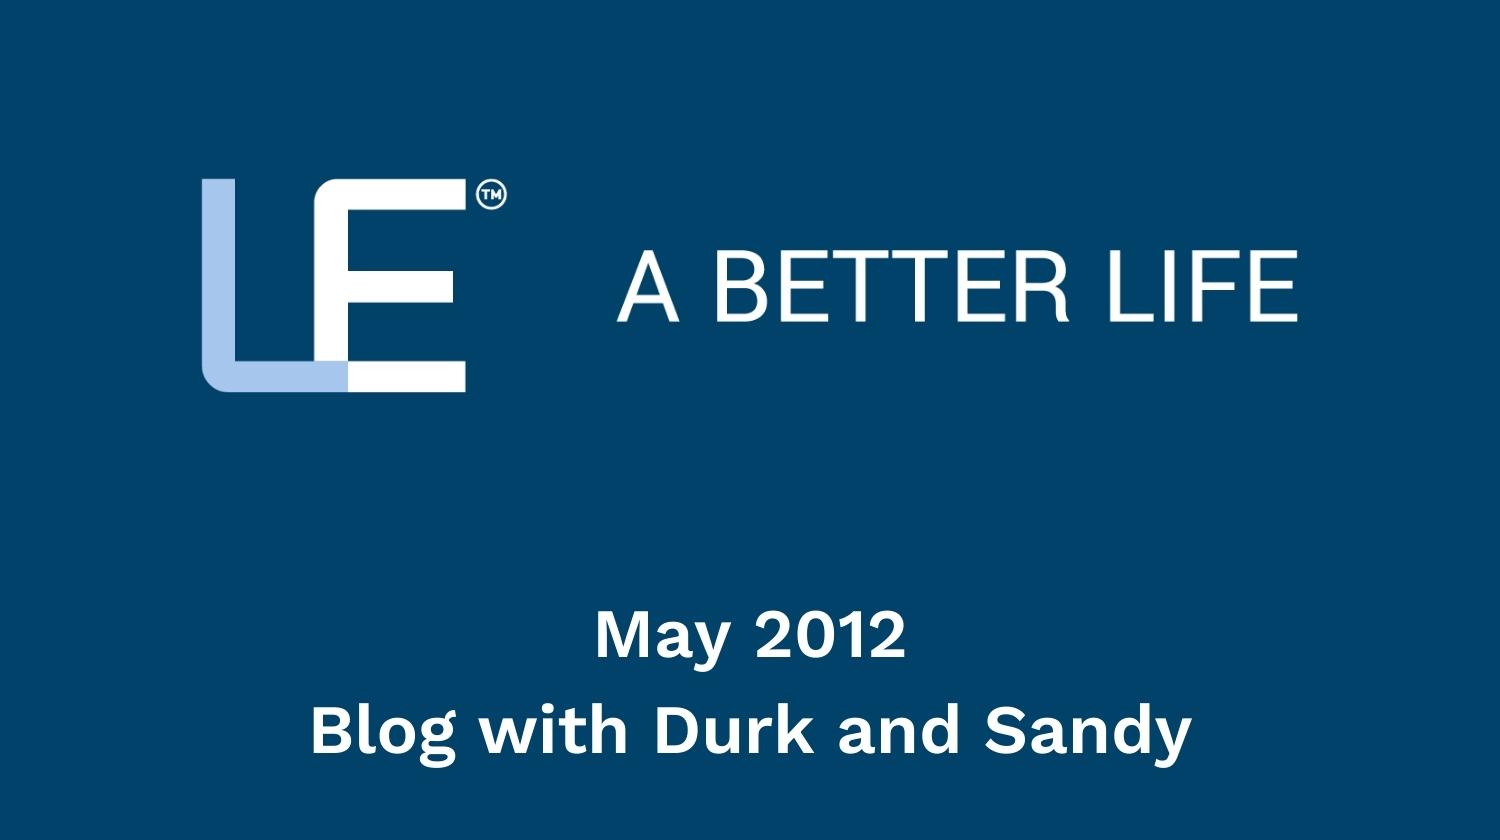 May 2012 Blog with Durk and Sandy